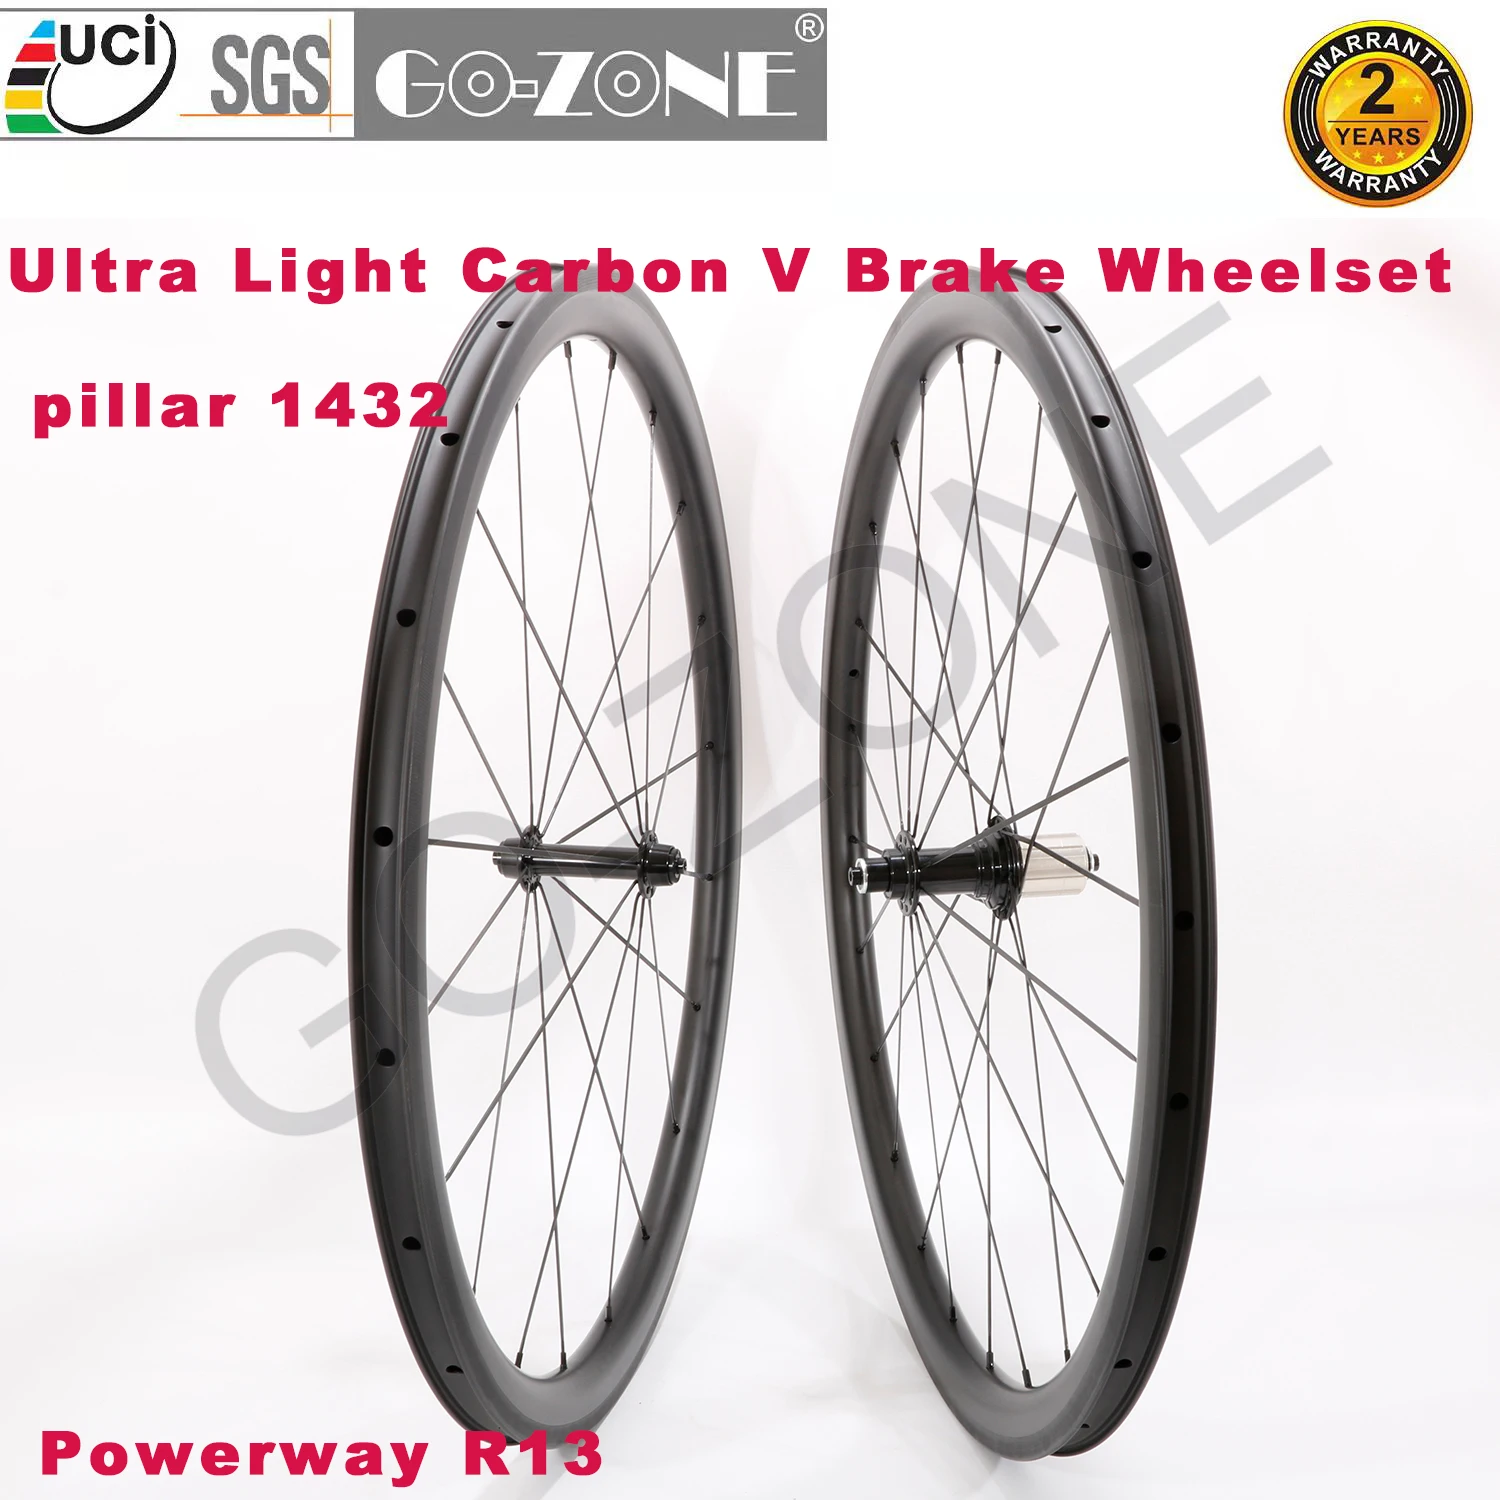 

Ultra Light Carbon 700c Wheelset V Brake Powerway R13 Strong And Sturdy Clincher Tubeless 20/24H Carbon Road Rim Brake Wheels